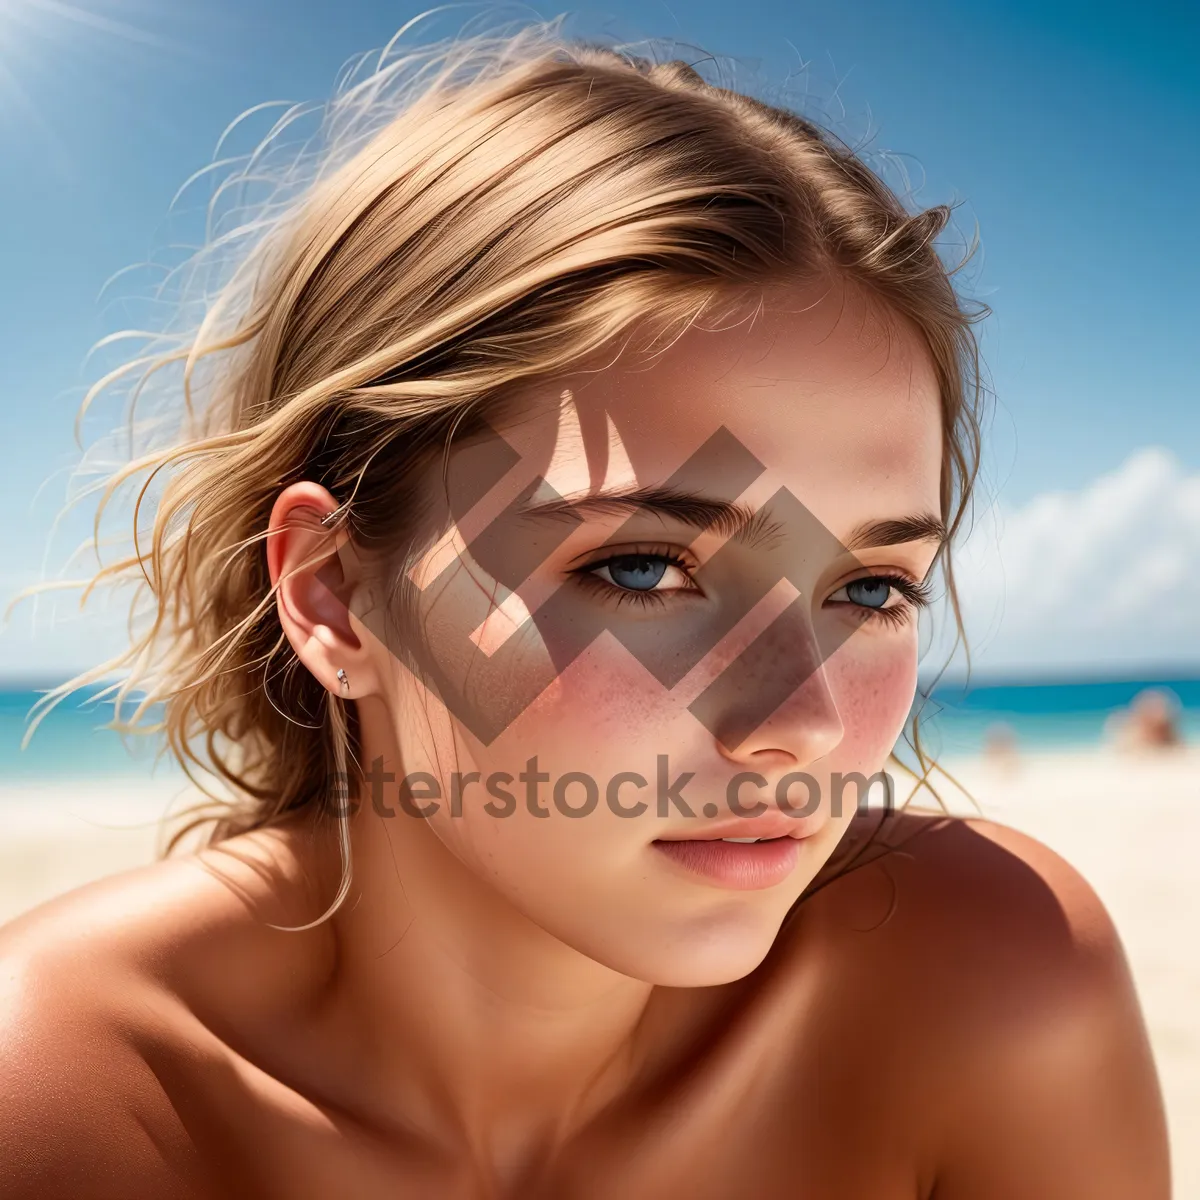 Picture of Sensual Beach Beauty: Happy and Attractive Model with Sunscreen